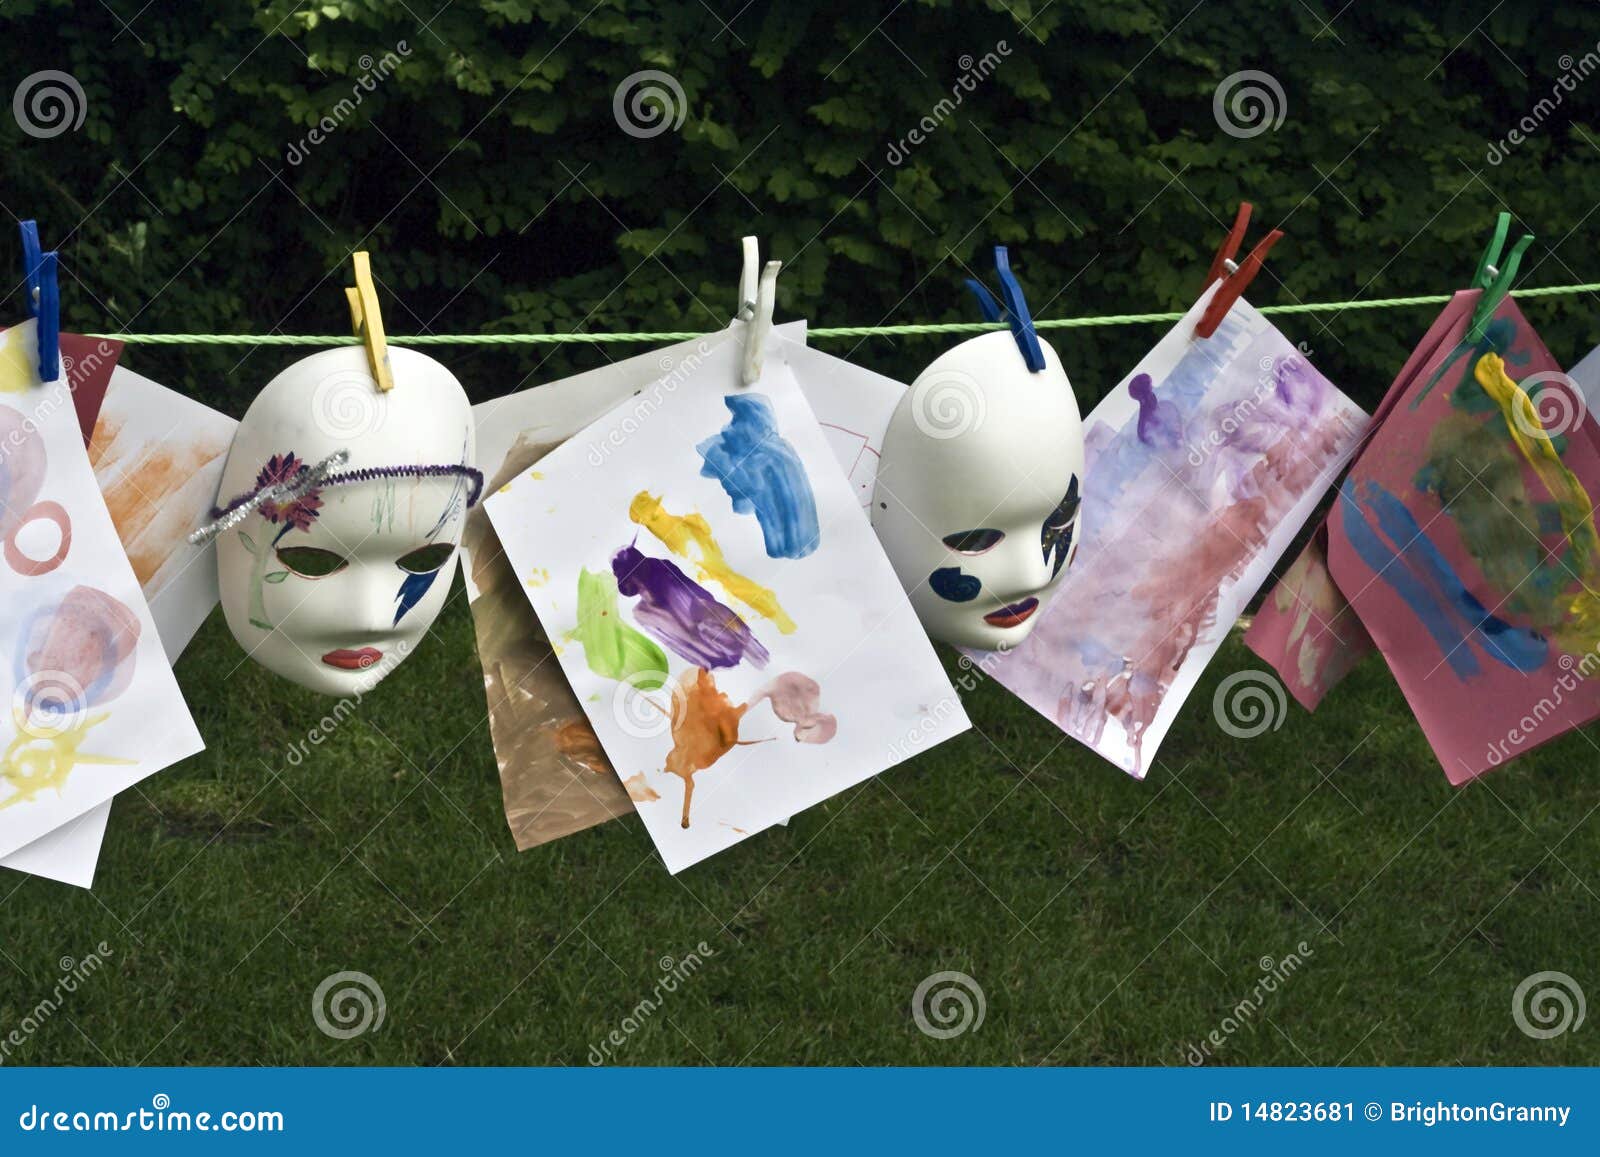 Two DIY Handmade Protective Cloth Fabric Masks in Thailand Hanging